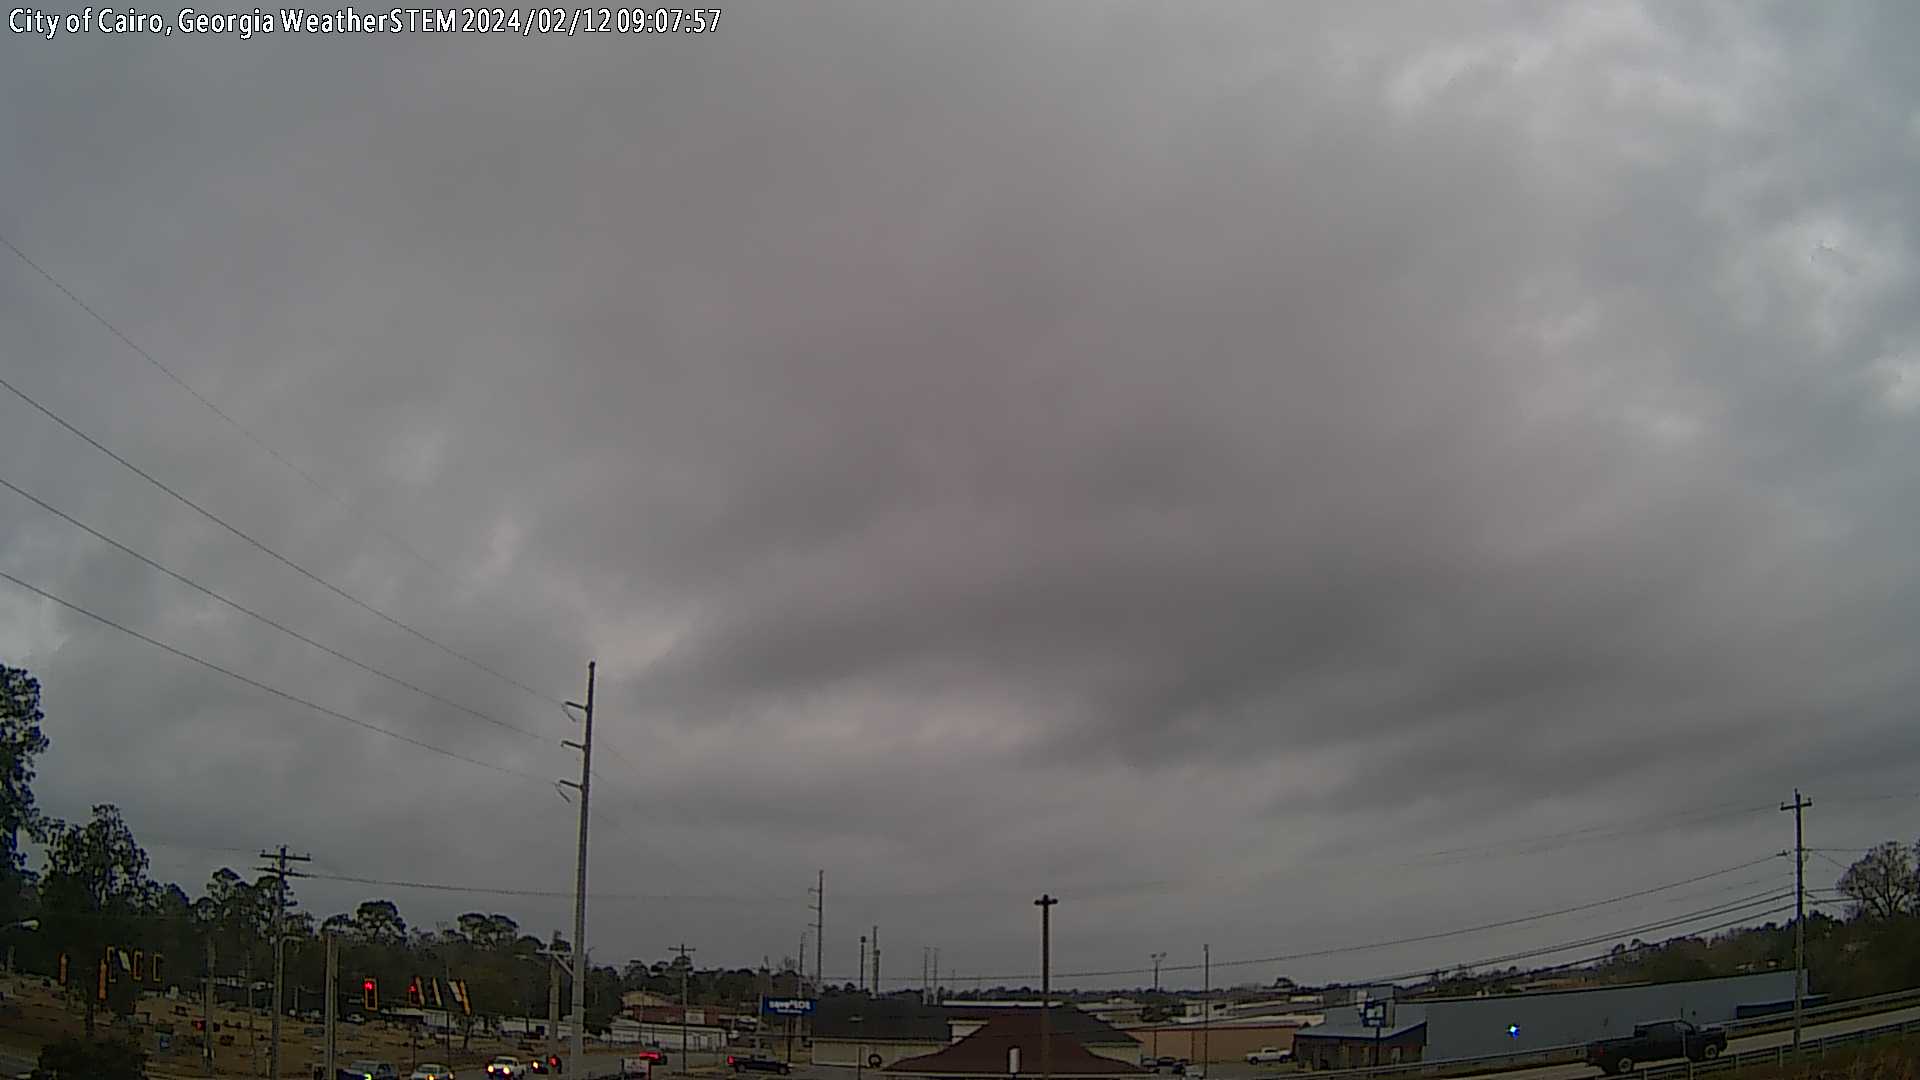  WeatherSTEM Downtown Camera CairoWxSTEM in Grady County, Georgia GA at City of Cairo Fire Department